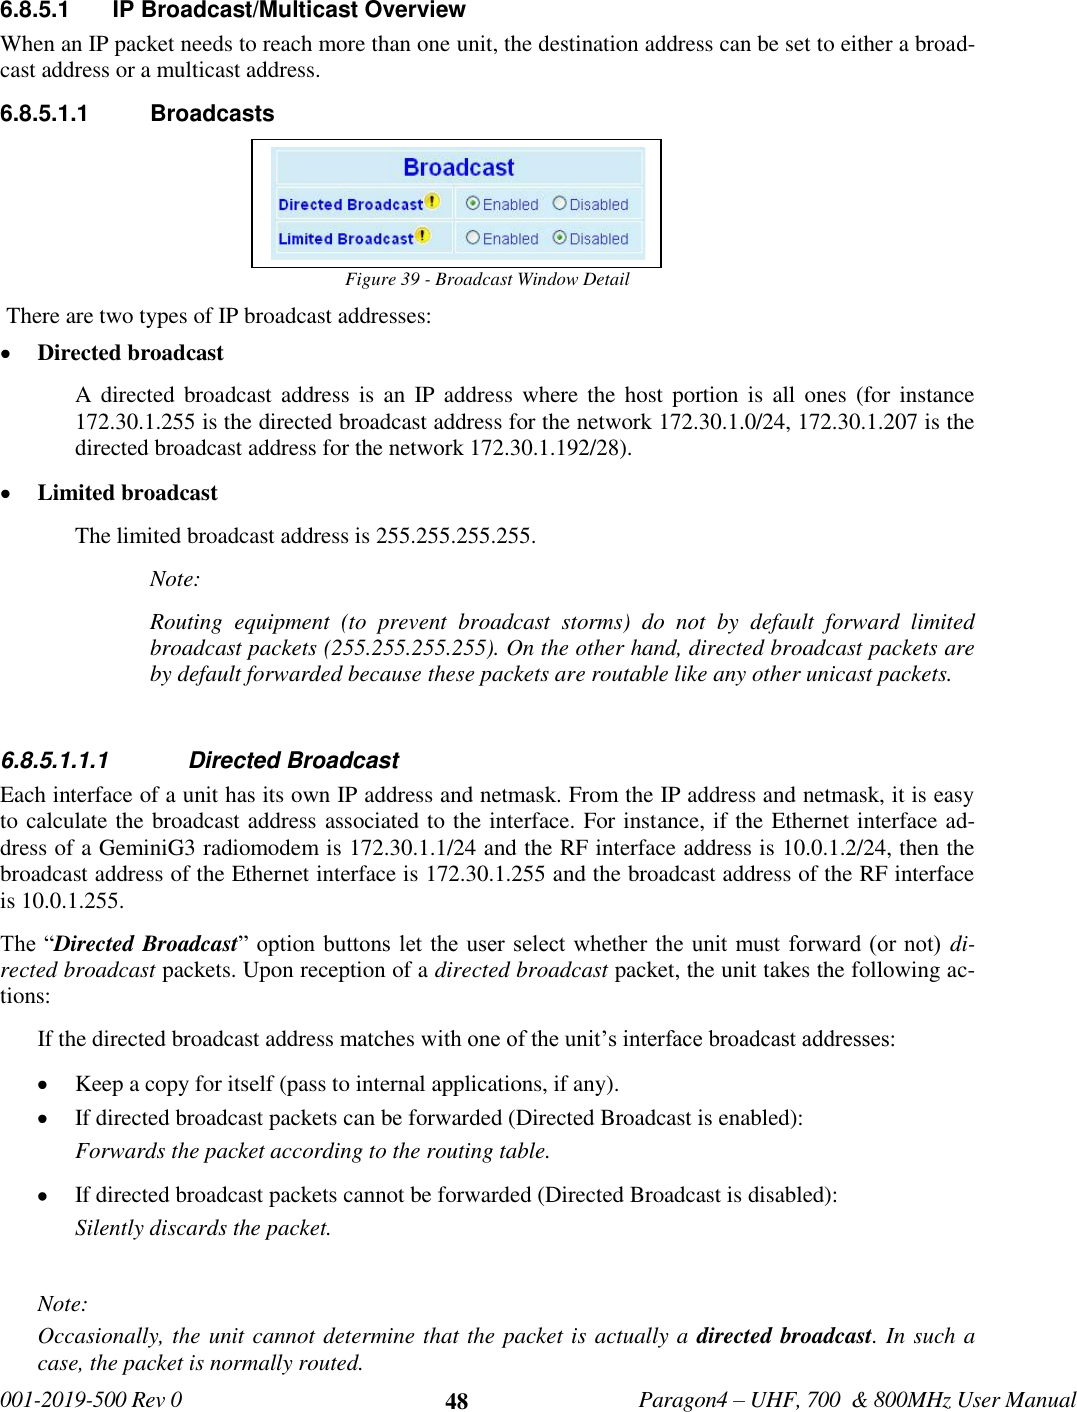   001-2019-500 Rev 0         Paragon4 – UHF, 700  &amp; 800MHz User Manual     48 6.8.5.1  IP Broadcast/Multicast Overview When an IP packet needs to reach more than one unit, the destination address can be set to either a broad-cast address or a multicast address. 6.8.5.1.1  Broadcasts Figure 39 - Broadcast Window Detail  There are two types of IP broadcast addresses:   Directed broadcast  A directed  broadcast address  is  an  IP address  where the  host portion is  all  ones  (for  instance 172.30.1.255 is the directed broadcast address for the network 172.30.1.0/24, 172.30.1.207 is the directed broadcast address for the network 172.30.1.192/28).   Limited broadcast The limited broadcast address is 255.255.255.255. Note: Routing  equipment  (to  prevent  broadcast  storms)  do  not  by  default  forward  limited broadcast packets (255.255.255.255). On the other hand, directed broadcast packets are by default forwarded because these packets are routable like any other unicast packets.  6.8.5.1.1.1  Directed Broadcast Each interface of a unit has its own IP address and netmask. From the IP address and netmask, it is easy to calculate the broadcast address associated to the interface. For instance, if the Ethernet interface ad-dress of a GeminiG3 radiomodem is 172.30.1.1/24 and the RF interface address is 10.0.1.2/24, then the broadcast address of the Ethernet interface is 172.30.1.255 and the broadcast address of the RF interface is 10.0.1.255. The “Directed Broadcast” option  buttons let the user select  whether the unit must  forward (or not)  di-rected broadcast packets. Upon reception of a directed broadcast packet, the unit takes the following ac-tions: If the directed broadcast address matches with one of the unit’s interface broadcast addresses:  Keep a copy for itself (pass to internal applications, if any).  If directed broadcast packets can be forwarded (Directed Broadcast is enabled): Forwards the packet according to the routing table.  If directed broadcast packets cannot be forwarded (Directed Broadcast is disabled): Silently discards the packet.  Note:  Occasionally, the unit cannot determine that the packet is actually a directed broadcast. In such a case, the packet is normally routed.  